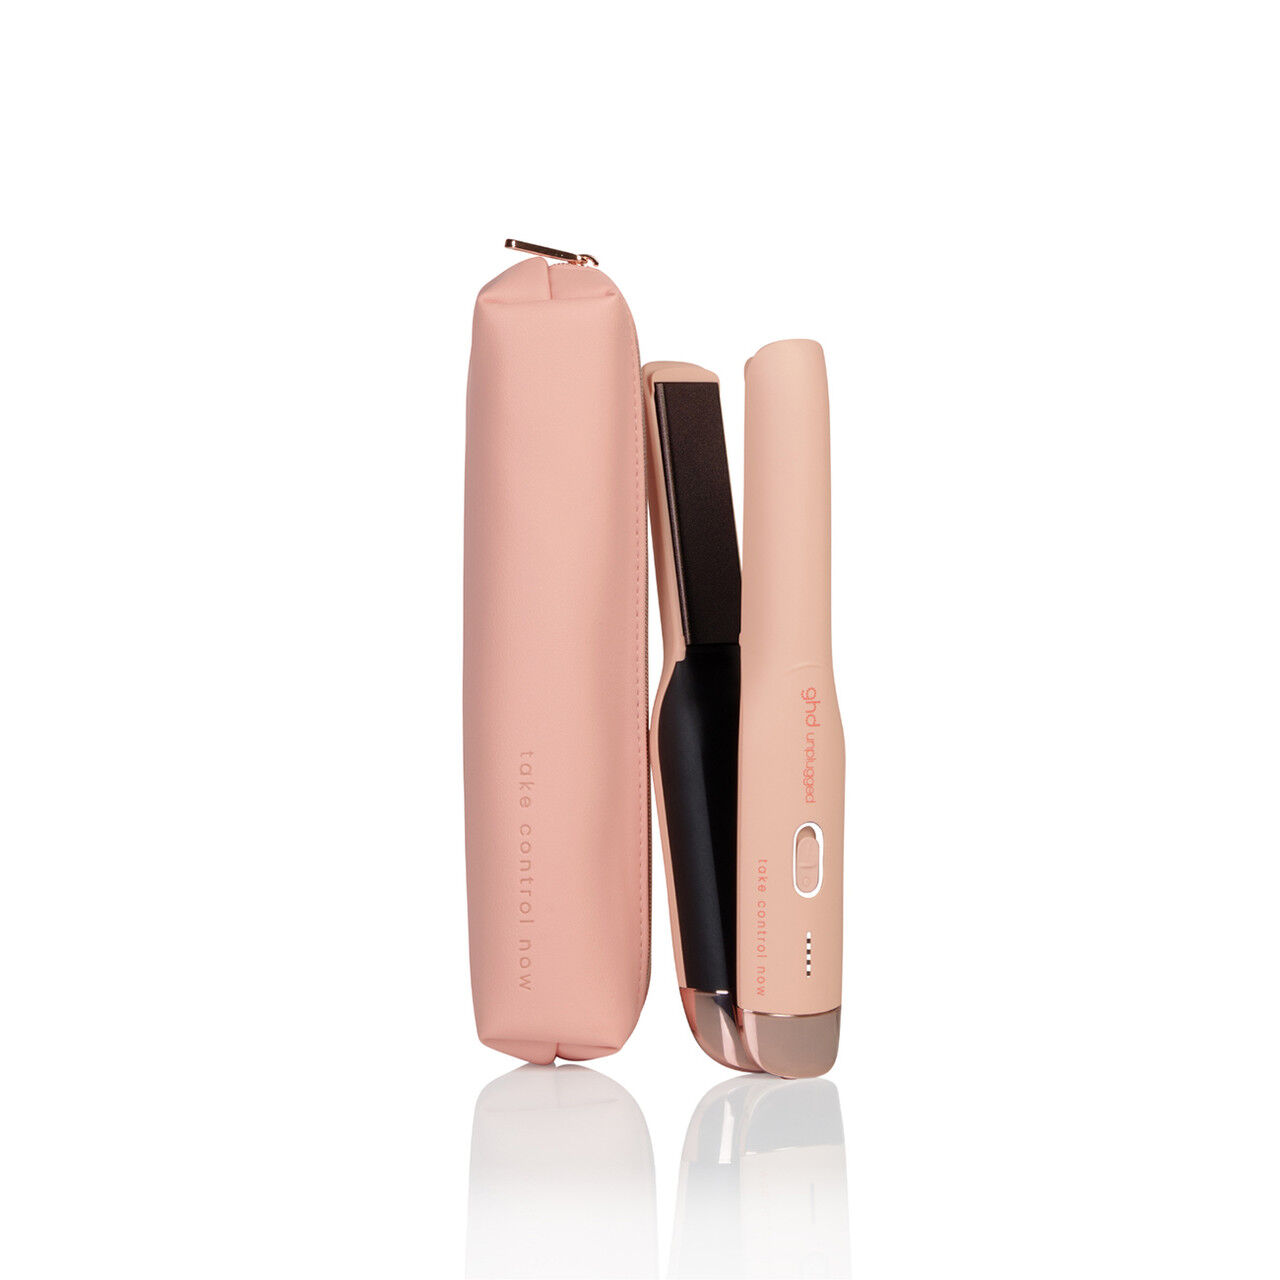 Lisseur GHD Unplugged Pink Collection "Take Control Now"